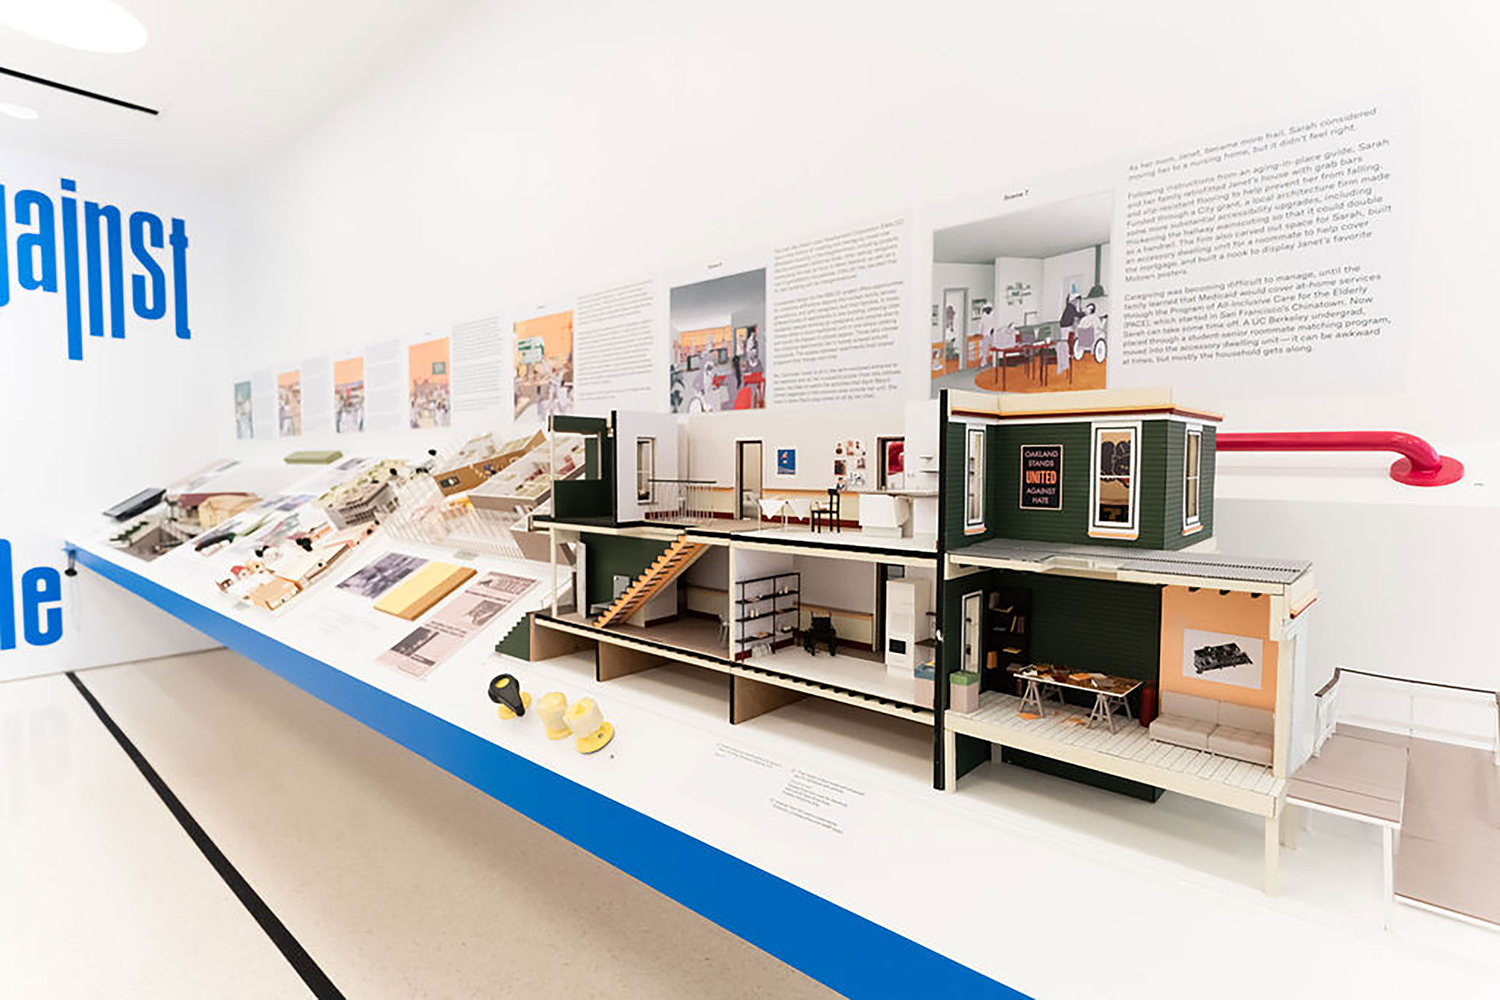 Long angled shelf with architectural models and images installed on it